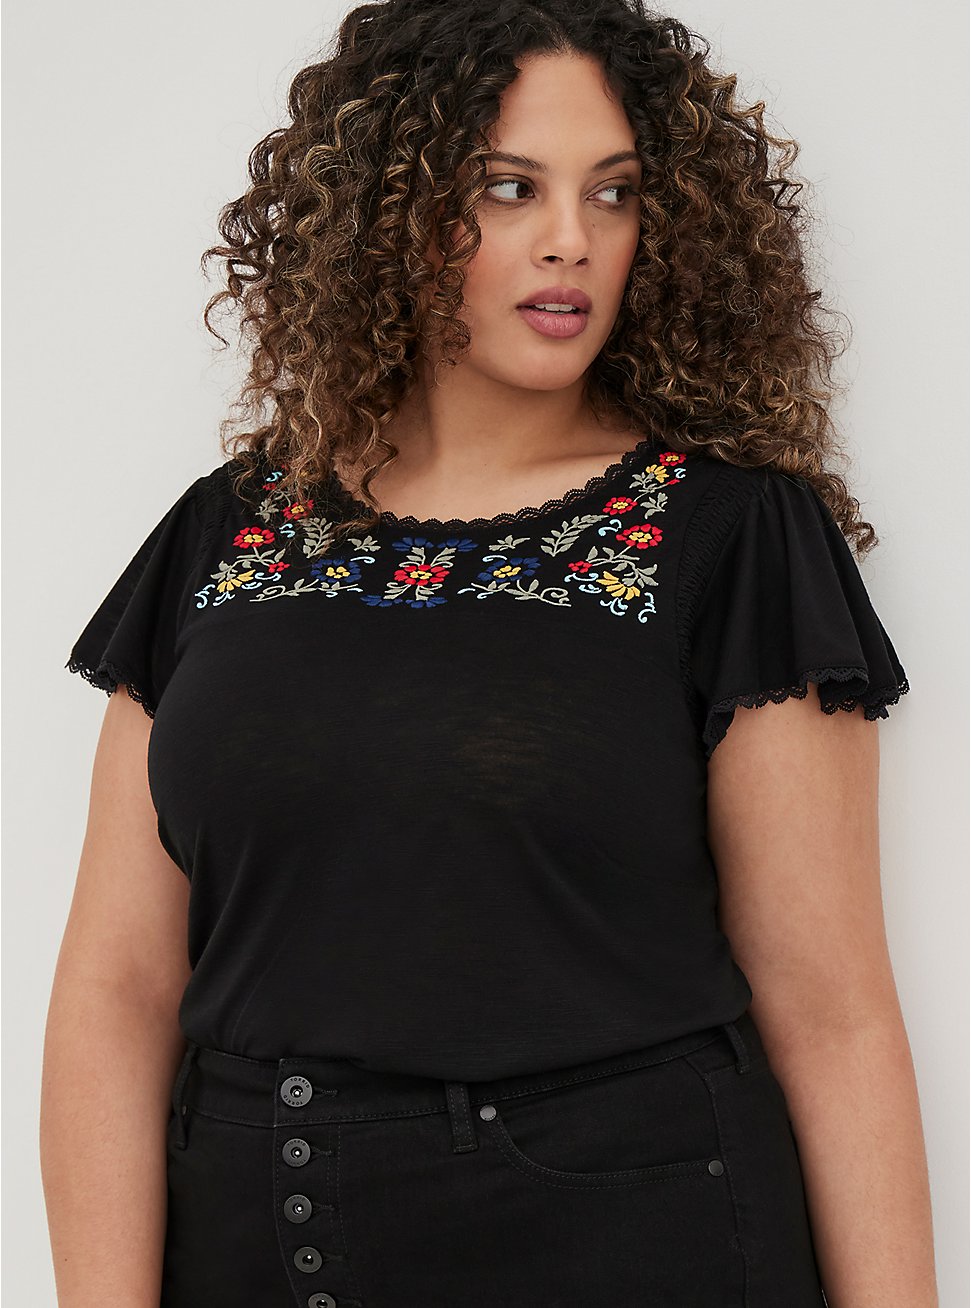 Plus Size Embroidered Swing Top - Polyester Black, DEEP BLACK, hi-res